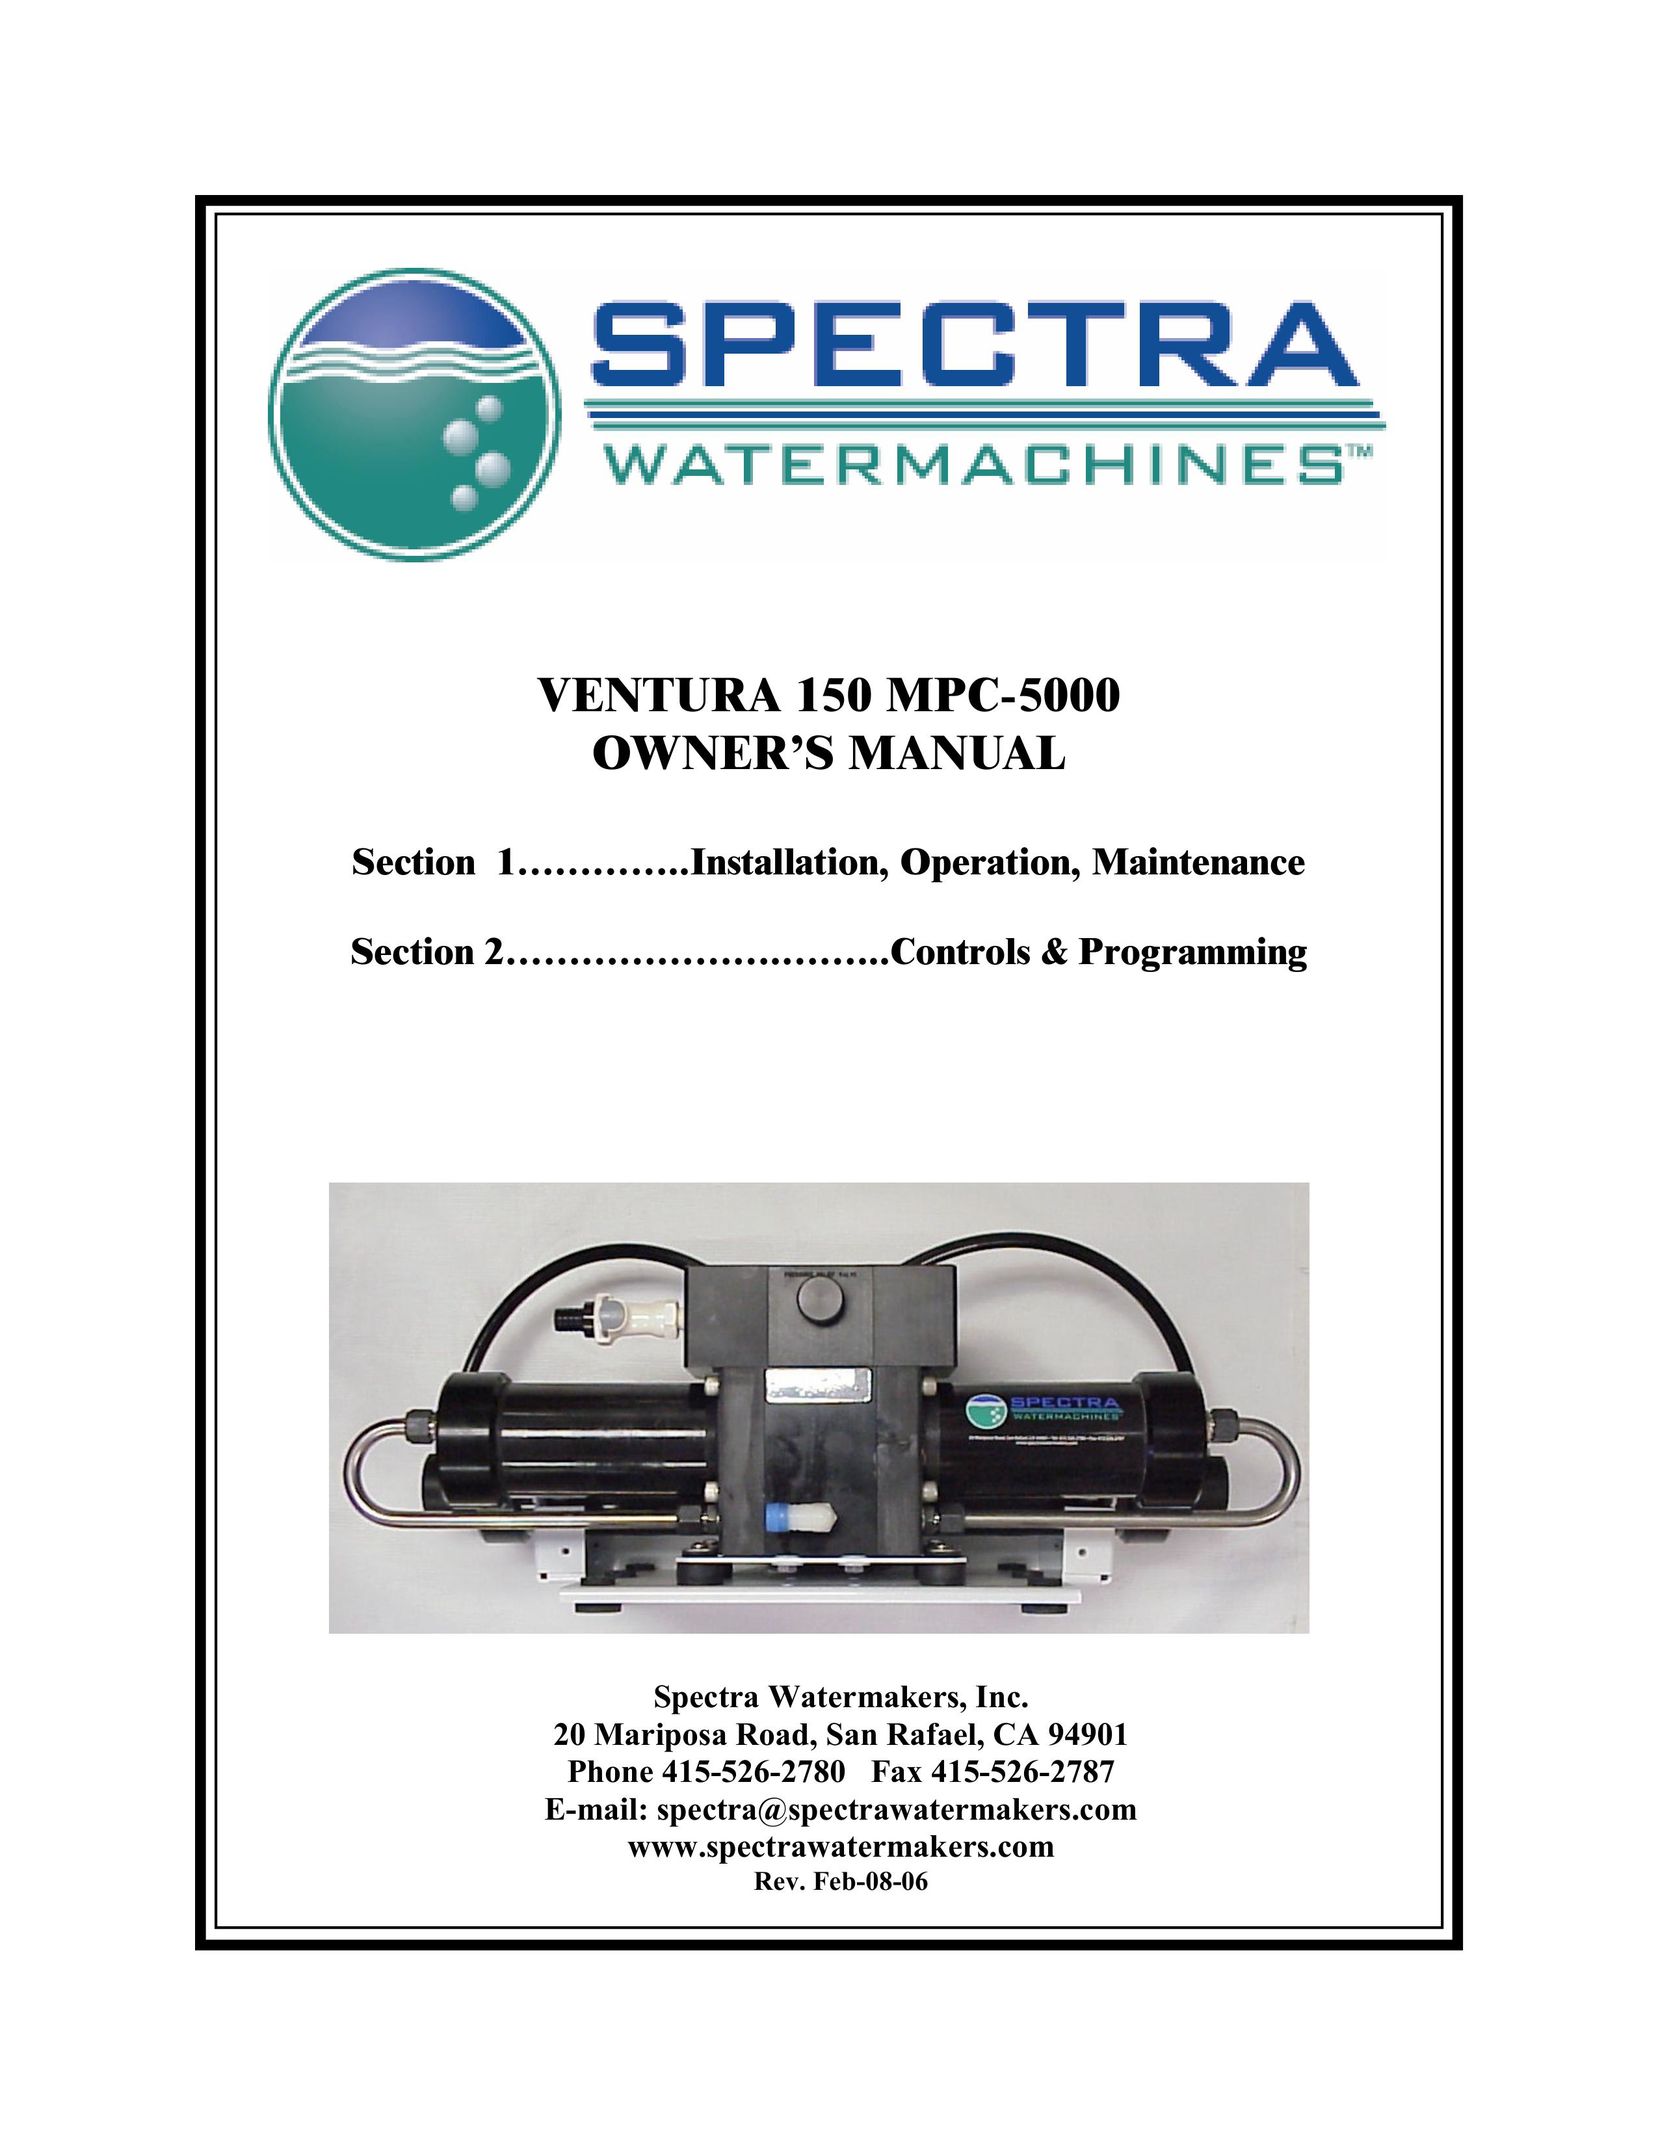 Spectra Watermakers MPC-5000 Water System User Manual